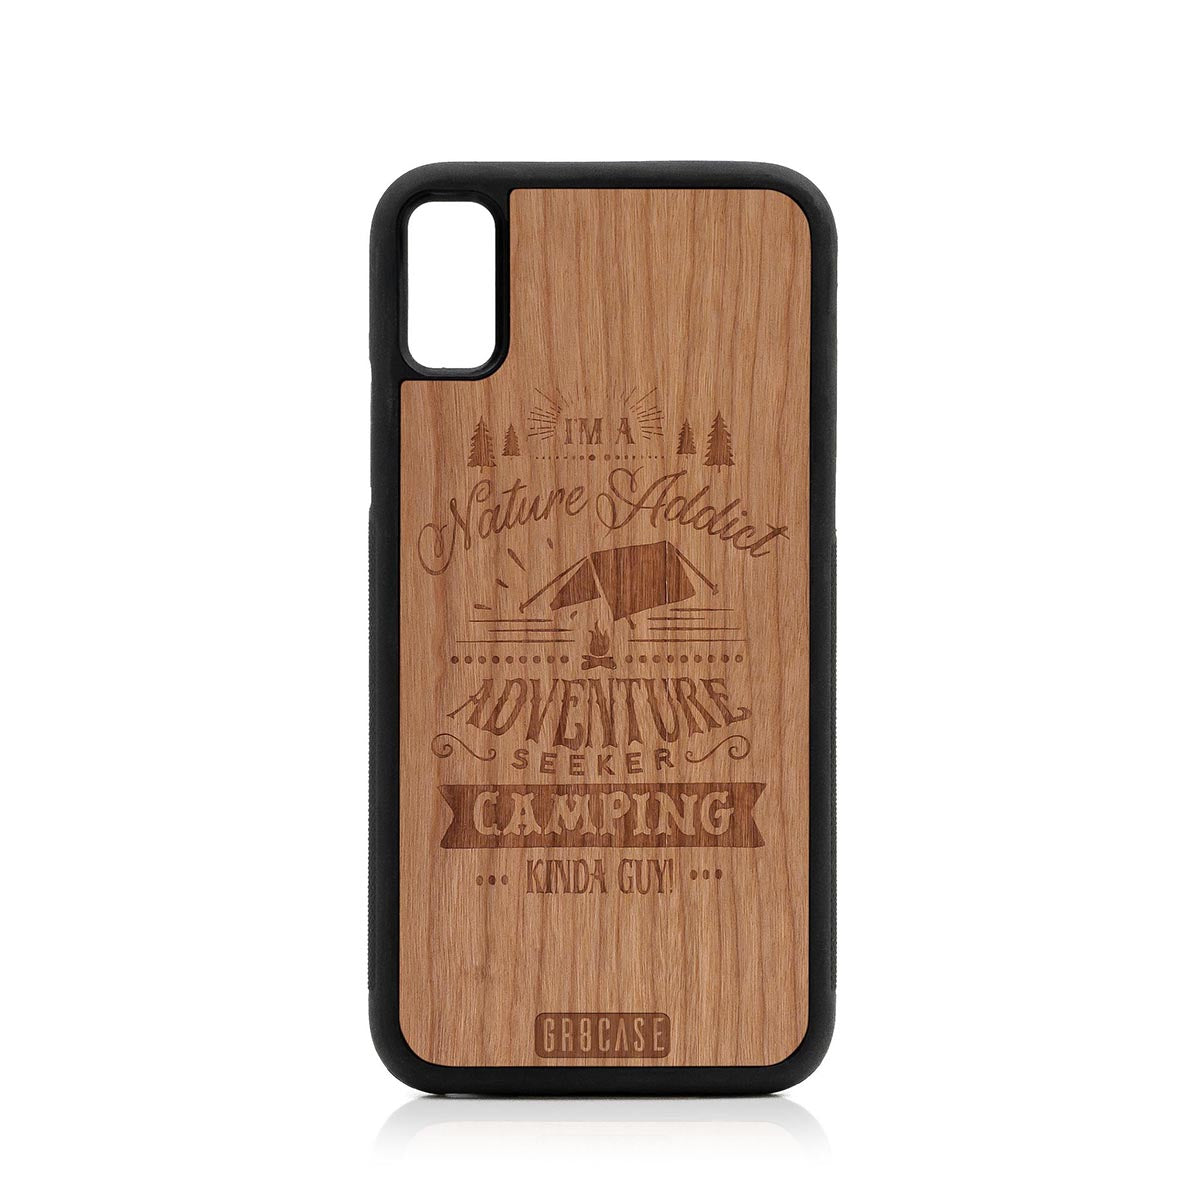 I'm A Nature Addict Adventure Seeker Camping Kinda Guy Design Wood Case For iPhone XR by GR8CASE